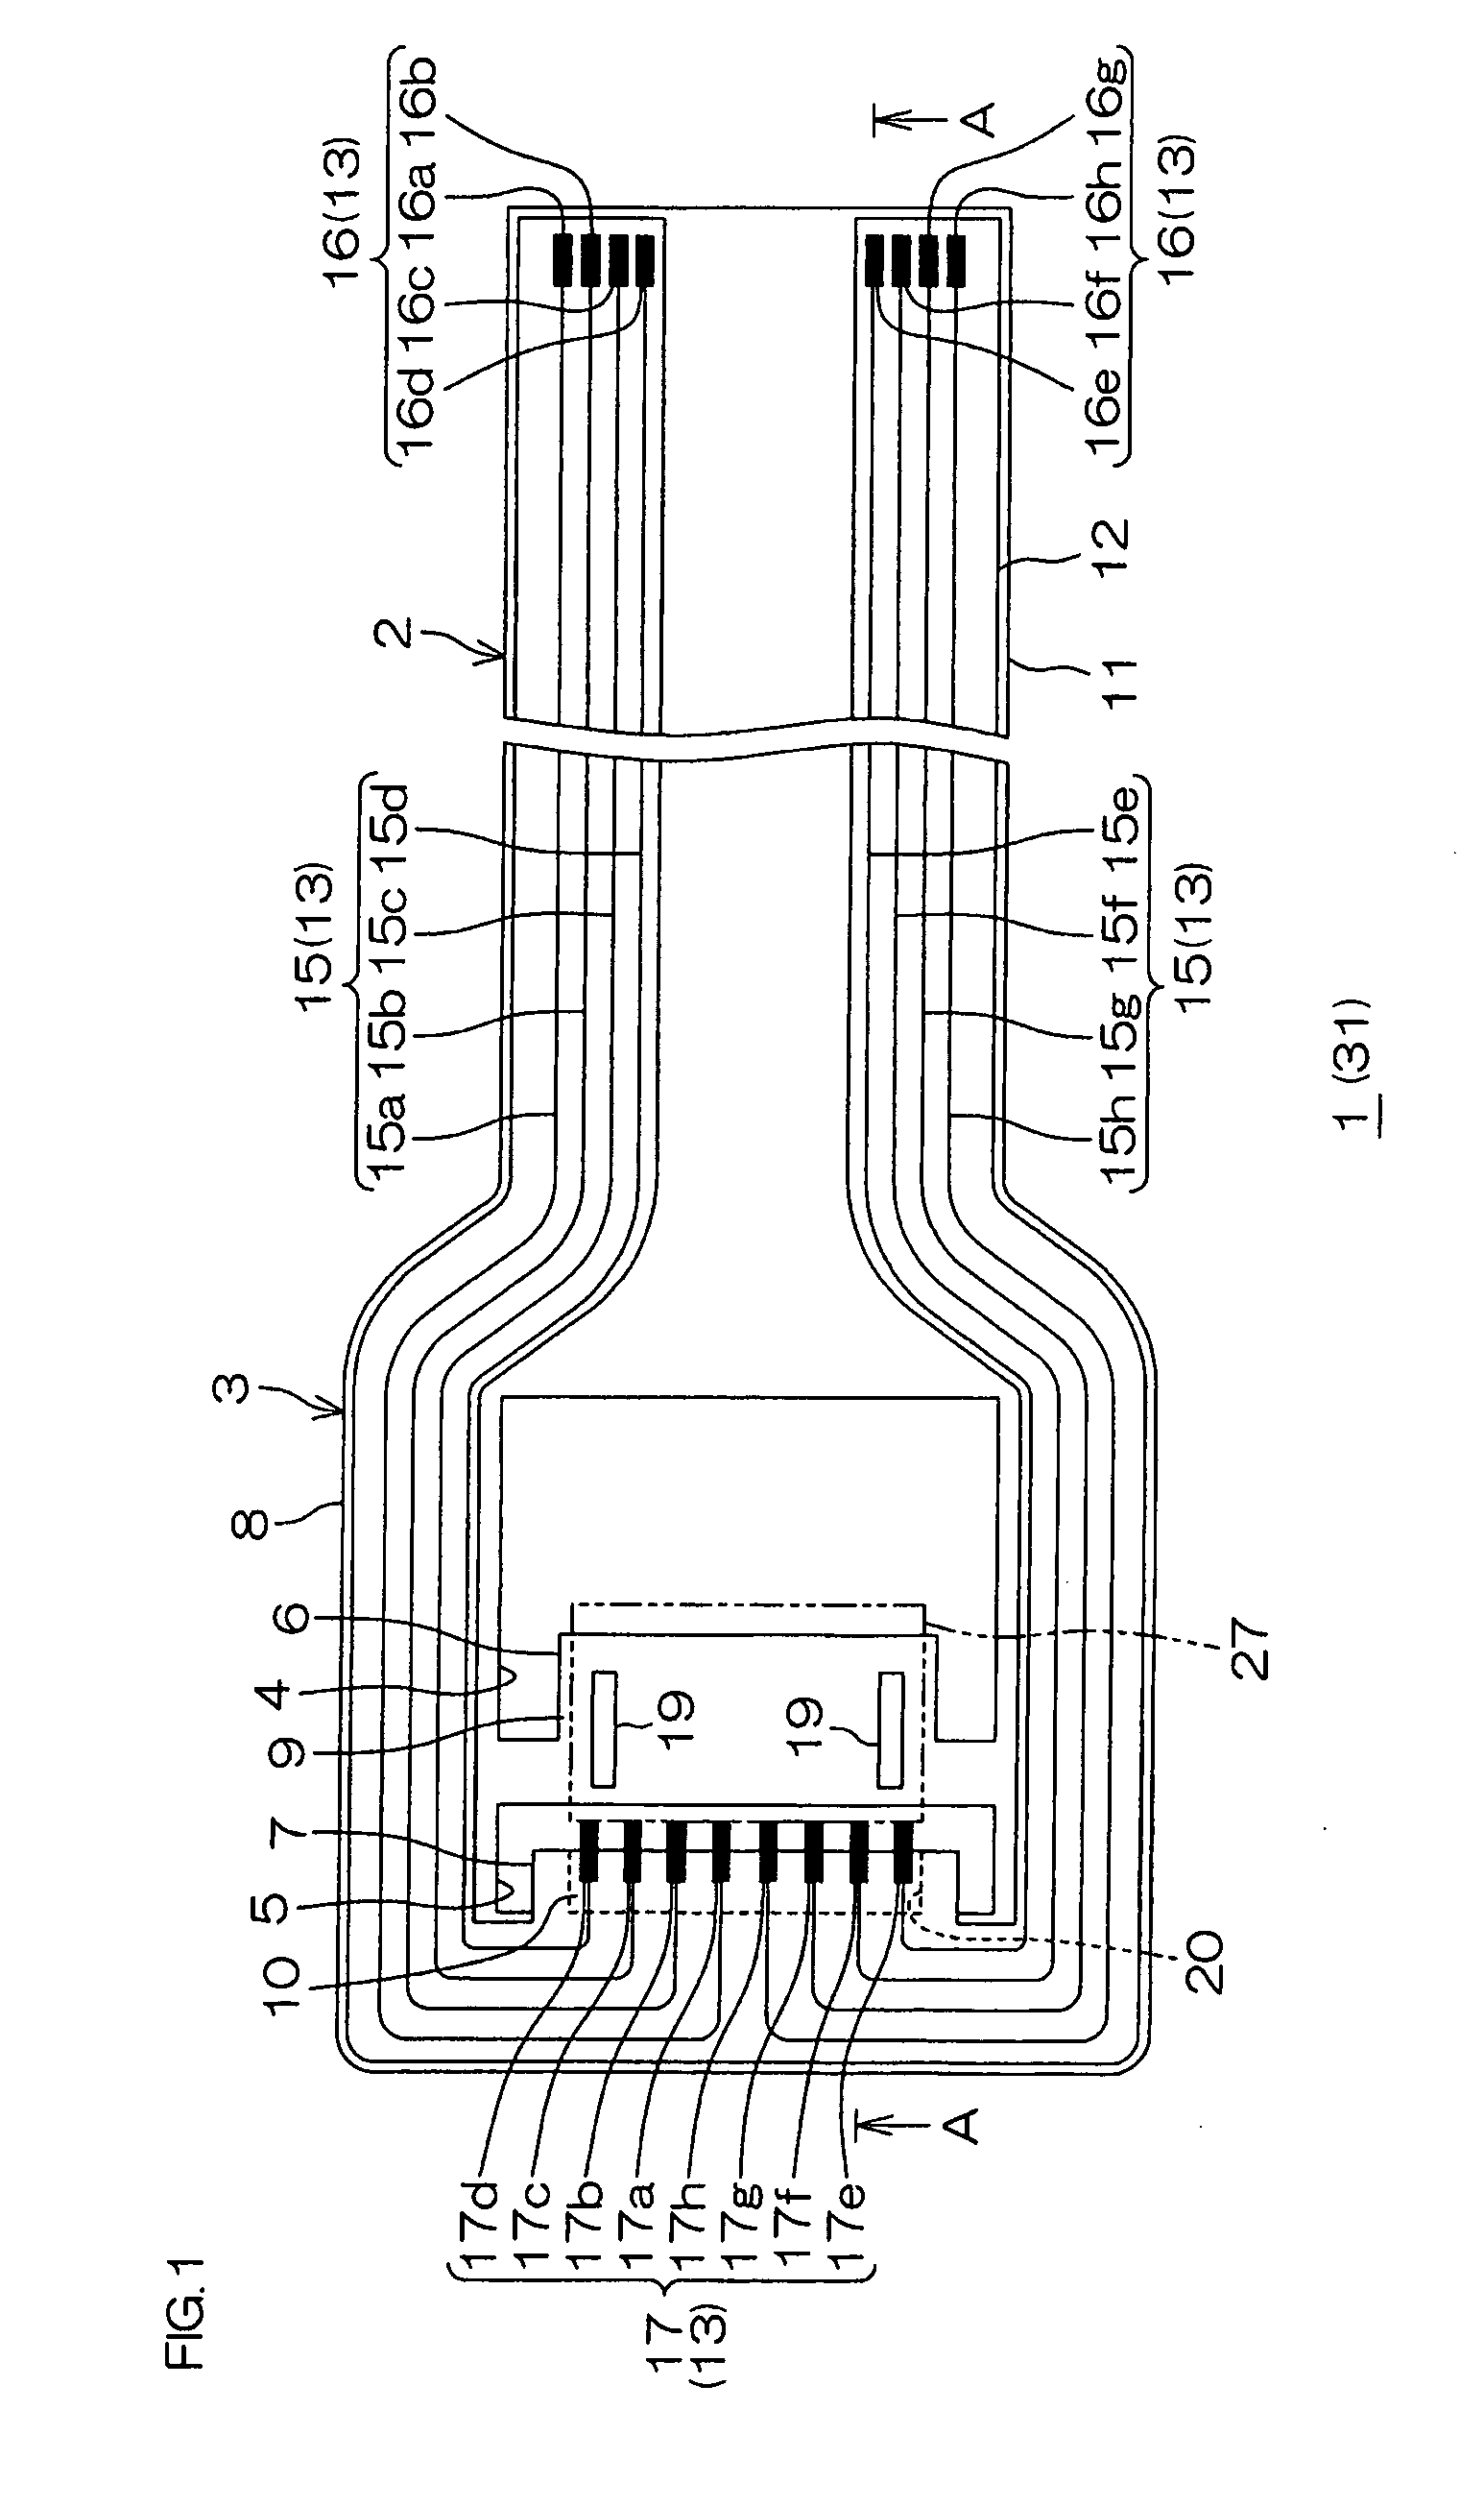 Connection structure of electronic component and wired circuit board, wired circuit board assembly, and method for testing electronic component